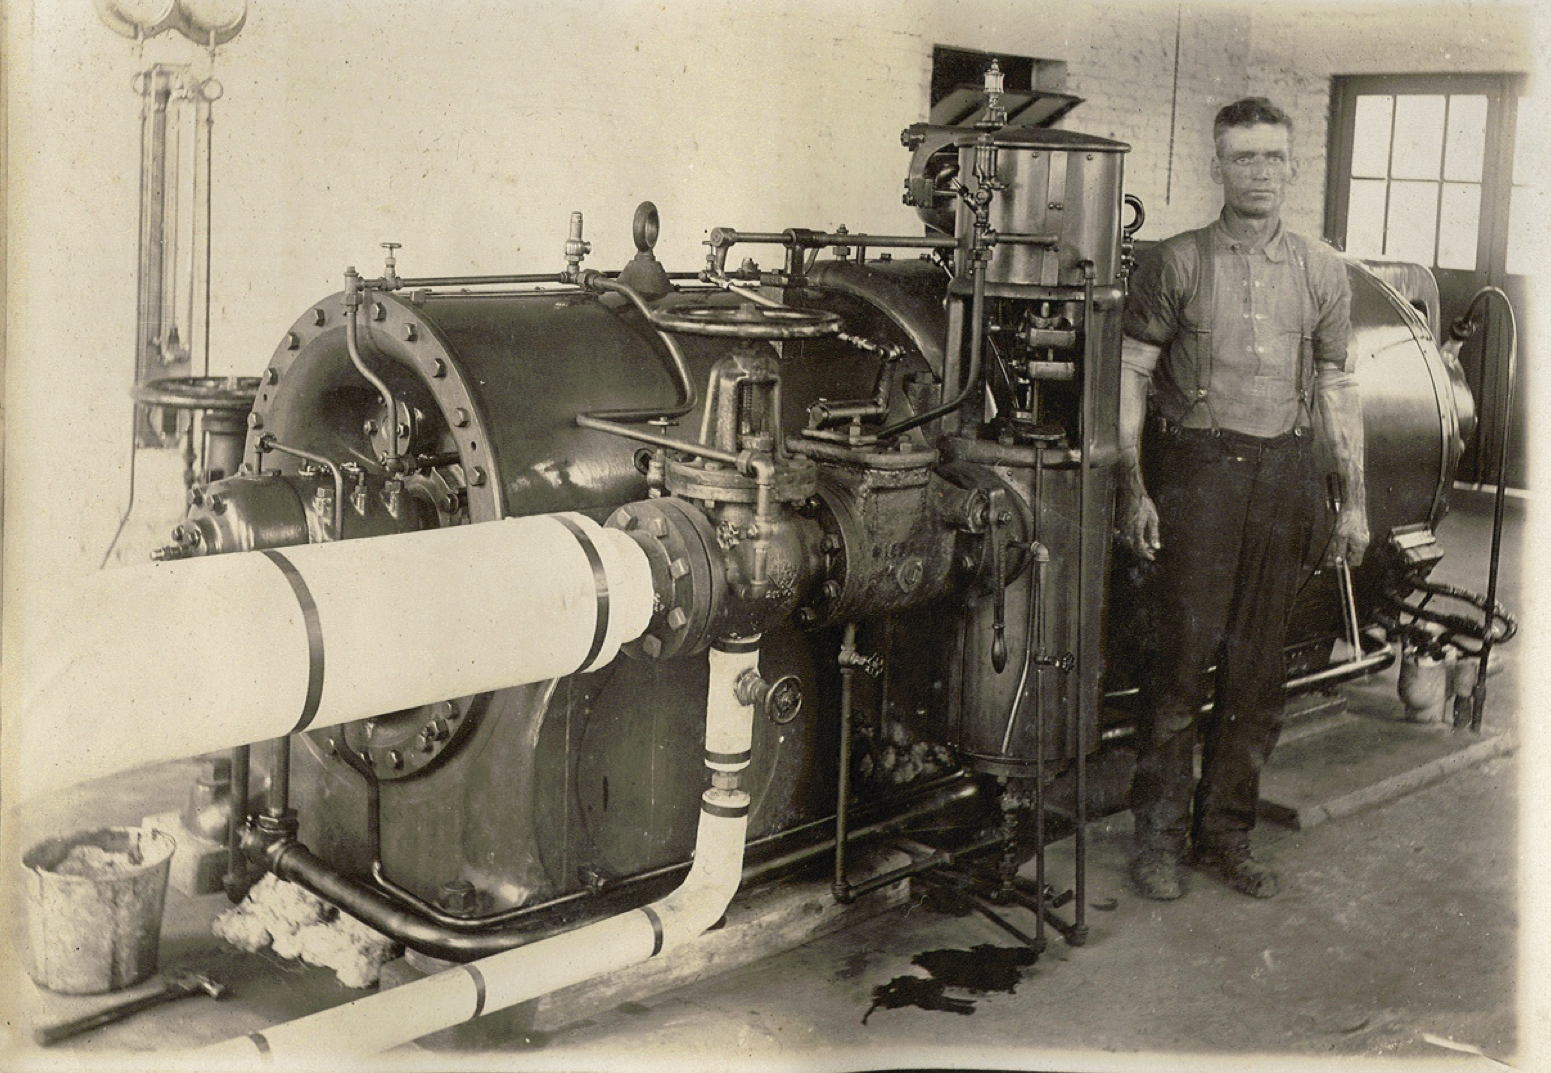 History of Franklinville, NC: Steam Power Machine